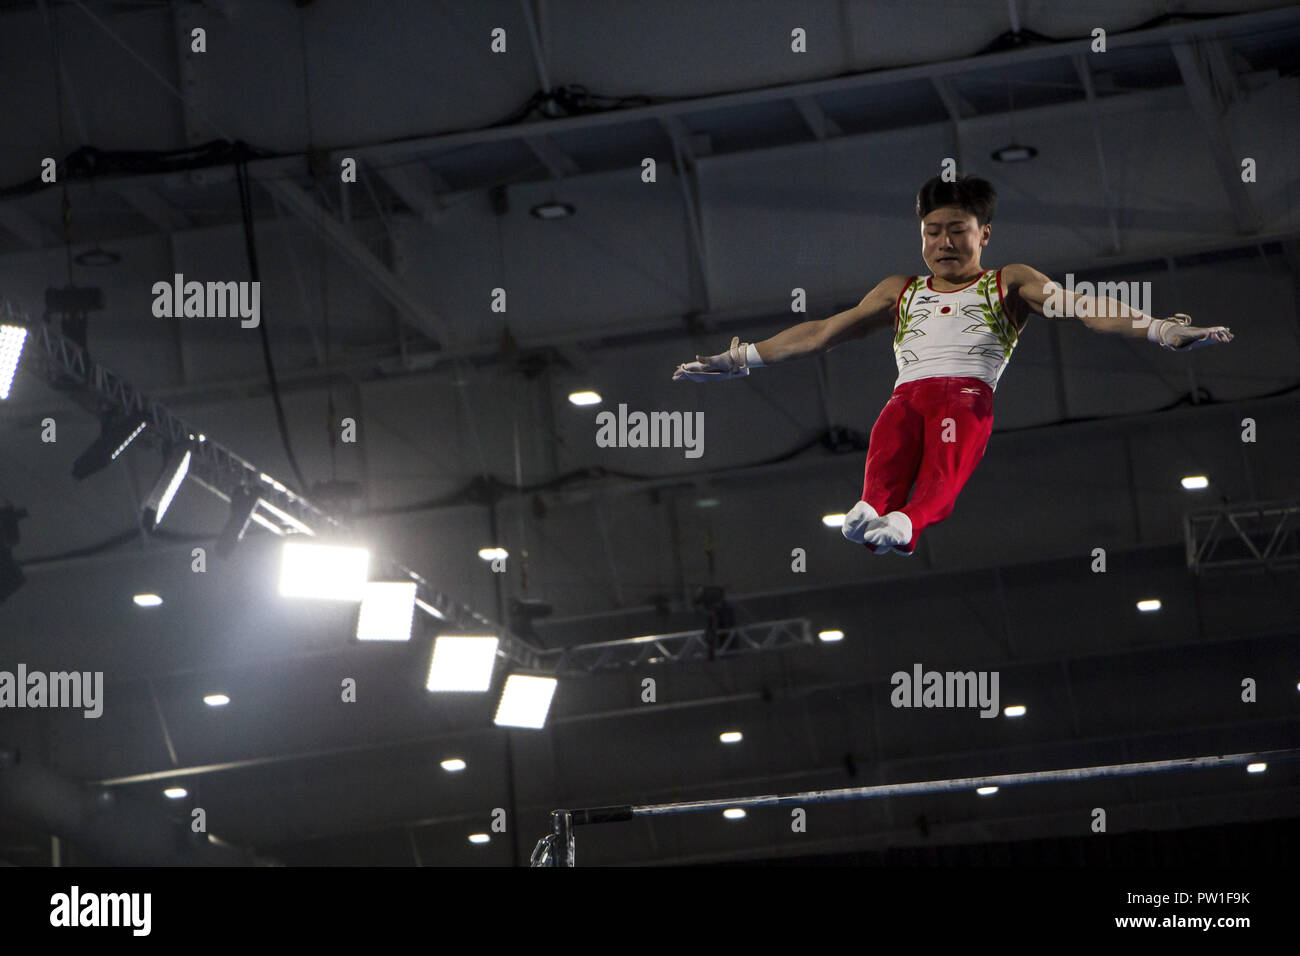 Buenos Aires, Buenos Aires, Argentina. 11th Oct, 2018. The Japanese Kitazono Takeru was the winner of the Gold Medal in the Multiple Masculine Artistic Gymnastics Competition at the 2018 Buenos Aires Youth Olympic Games. Credit: Roberto Almeida Aveledo/ZUMA Wire/Alamy Live News Stock Photo